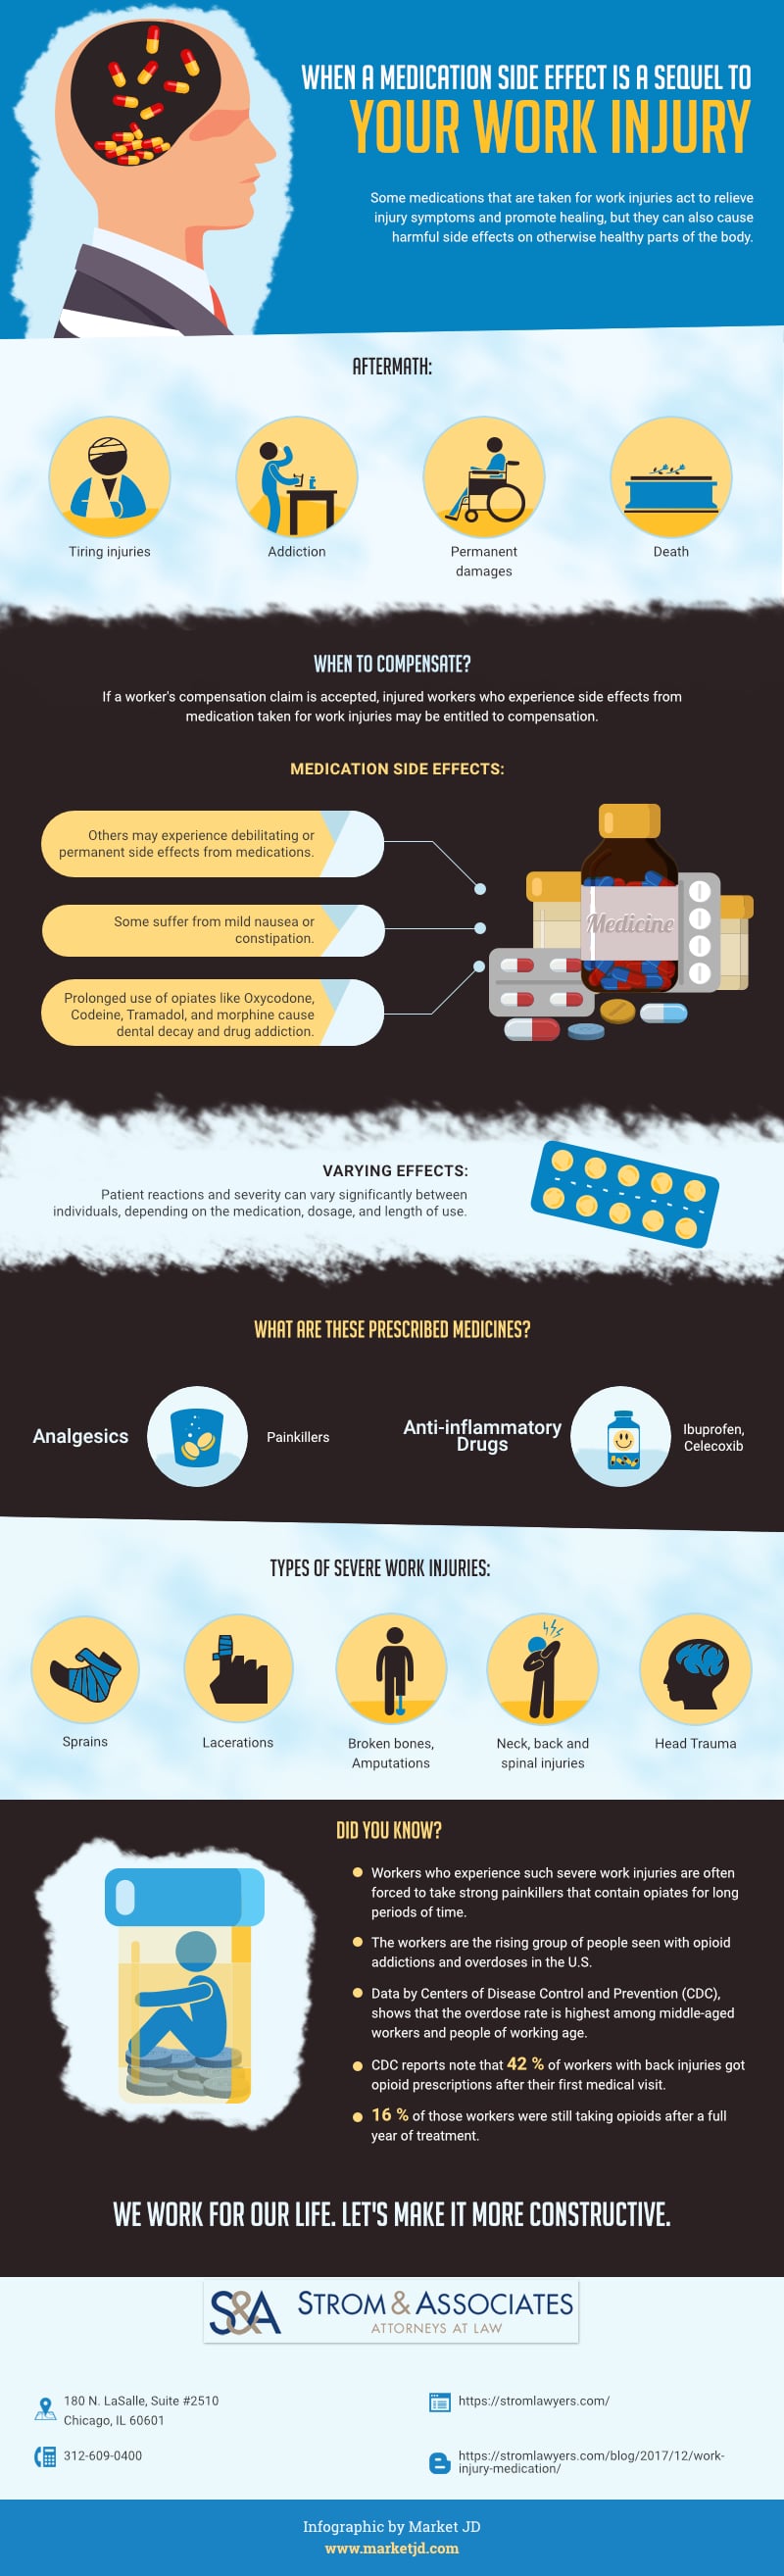 Medication side effect infographic